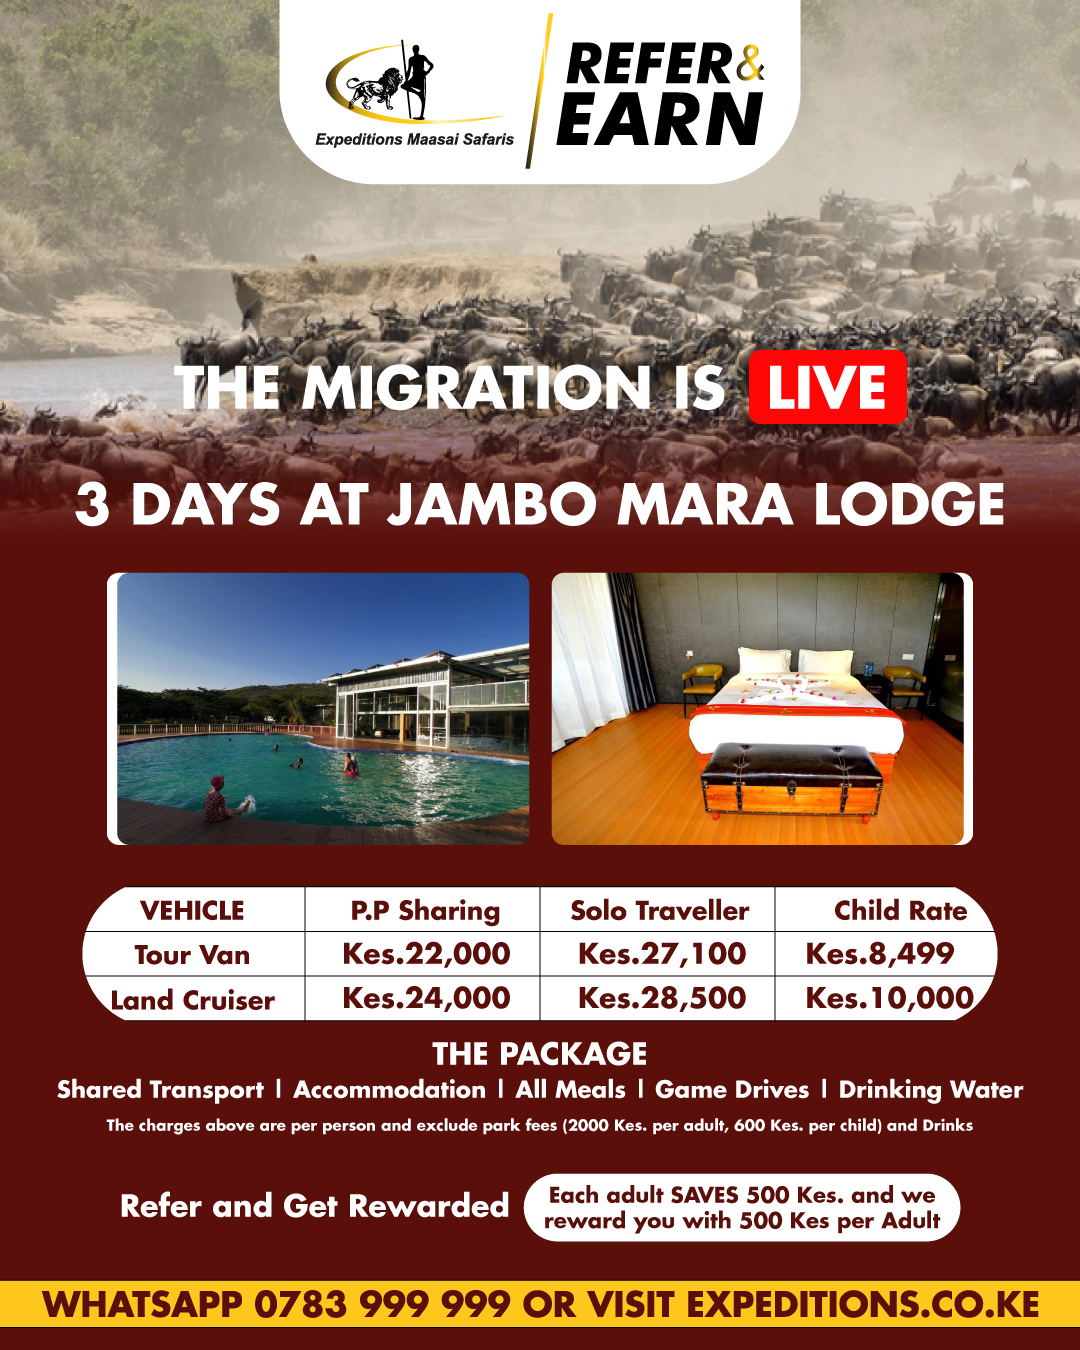 Get rewarded when you refer others to travel with Expeditions Maasai Safaris